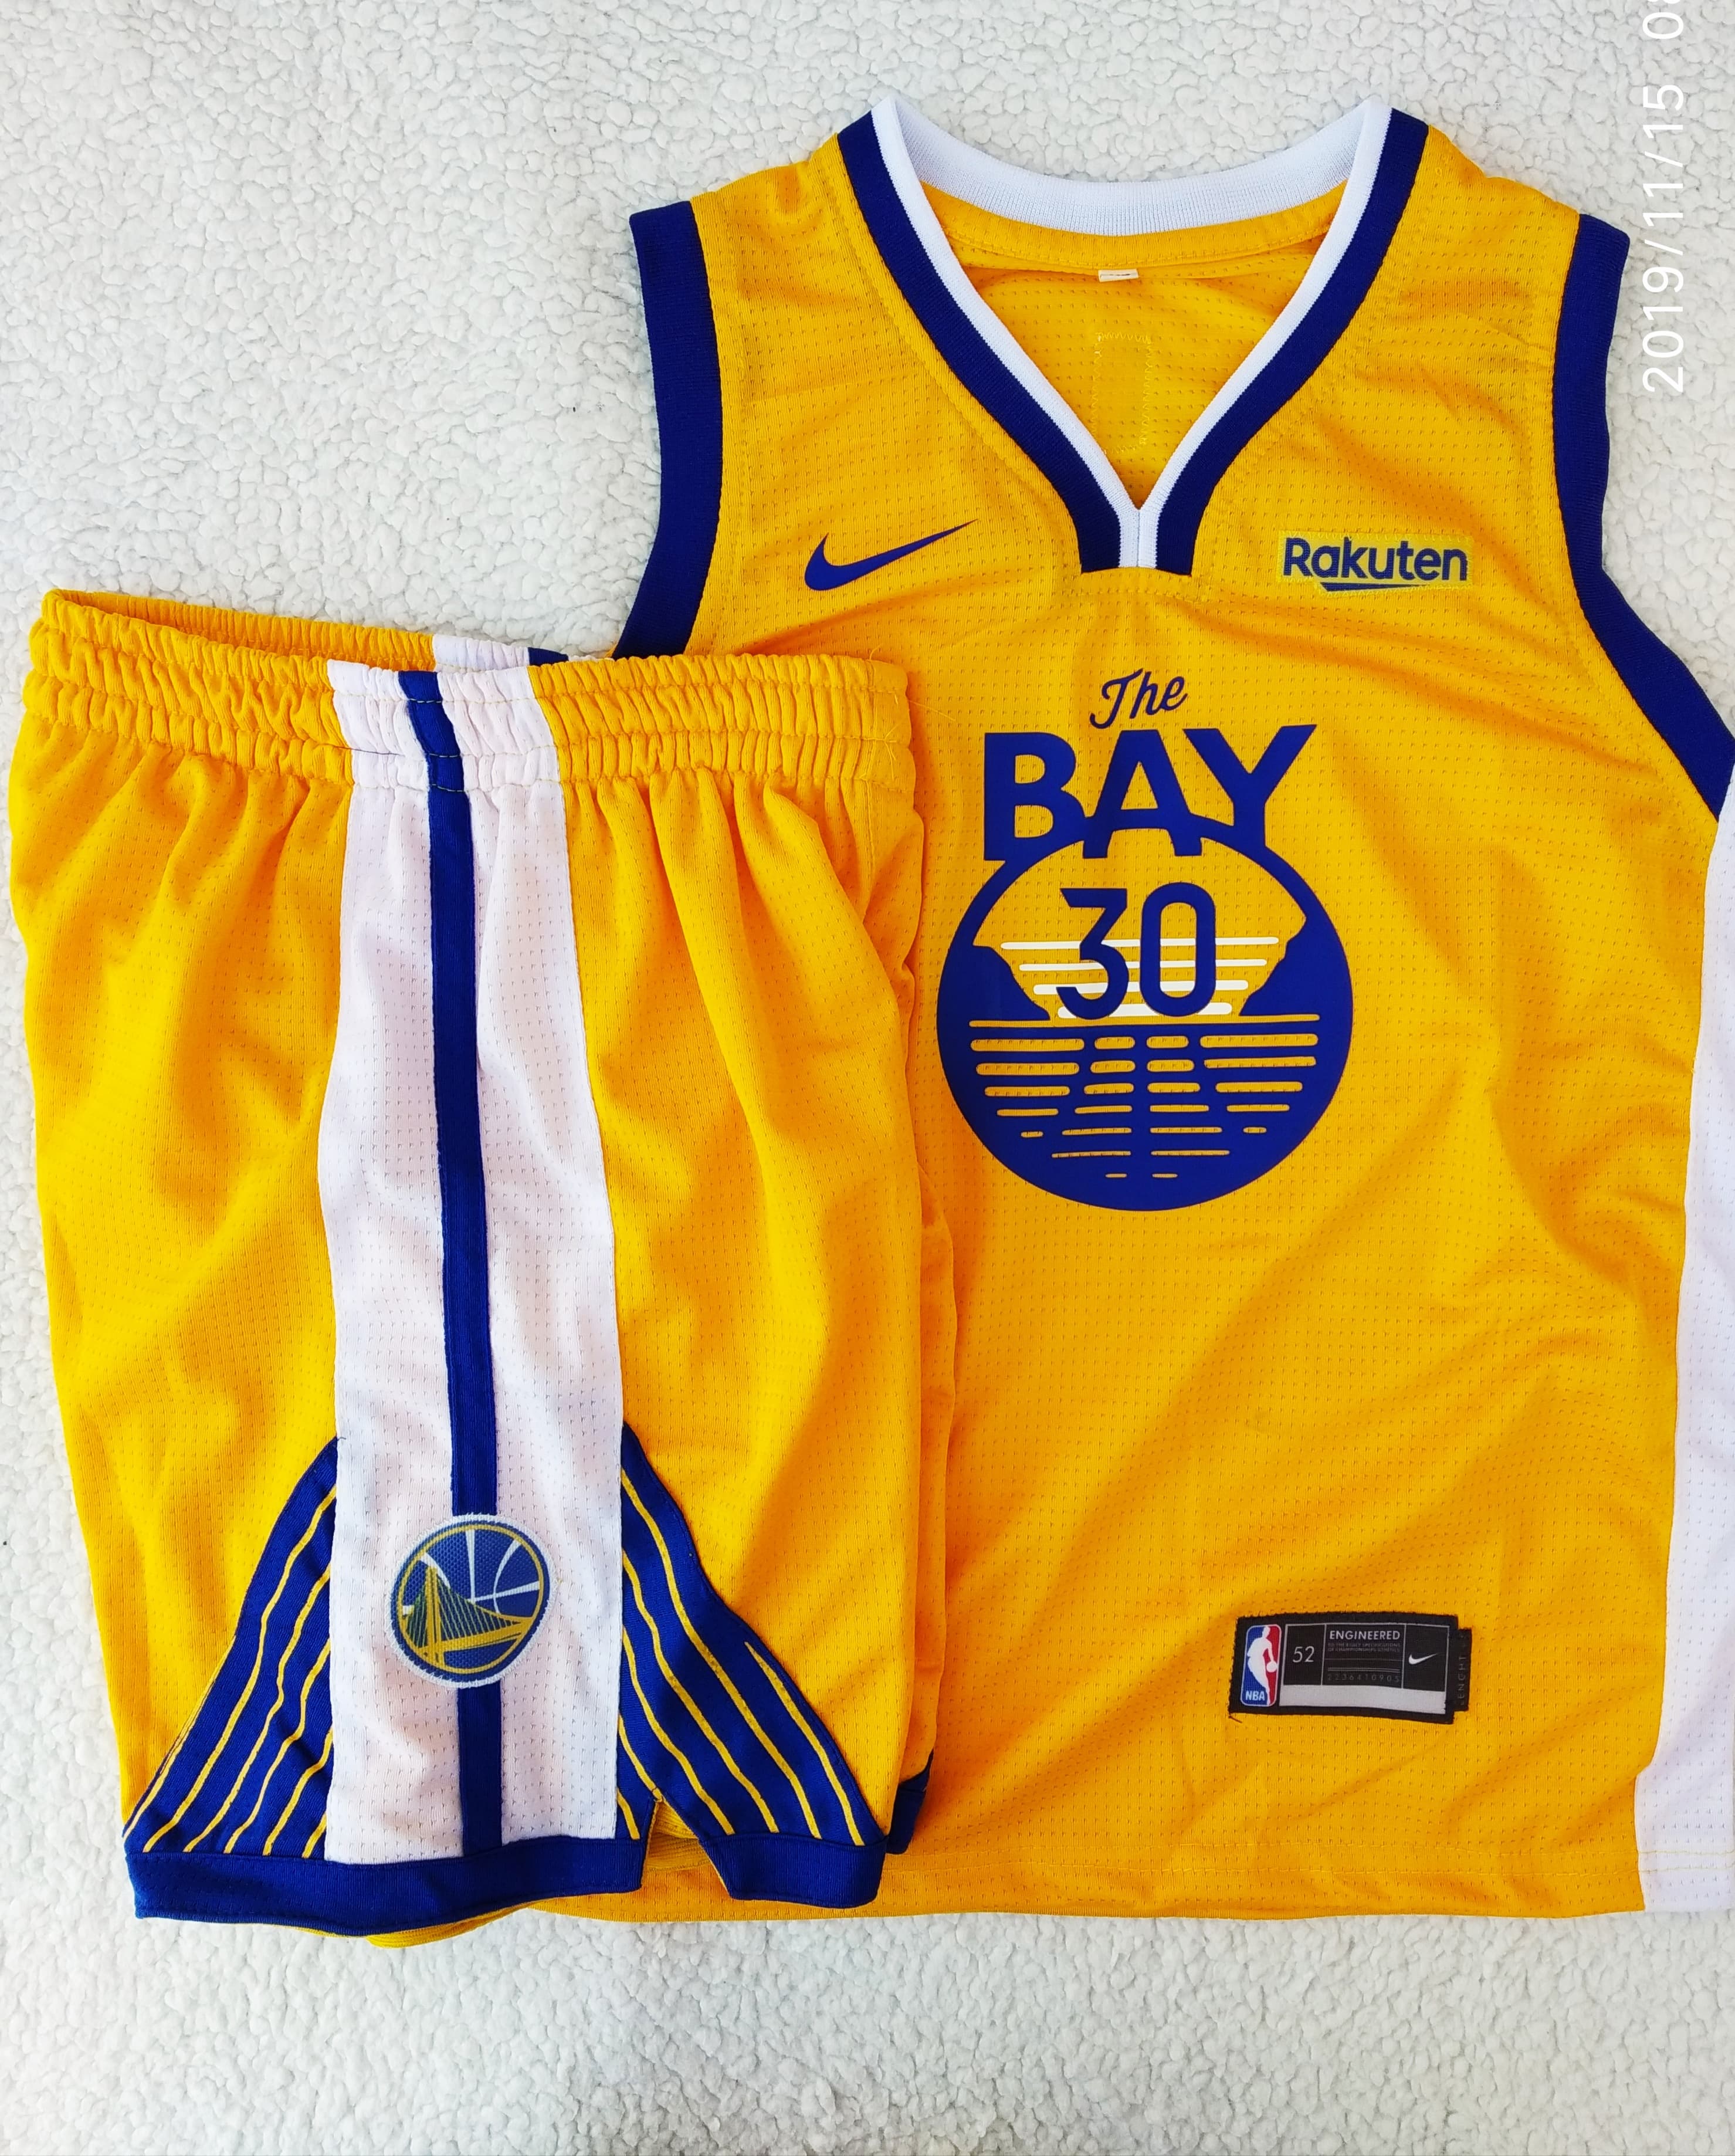 golden state the bay jersey